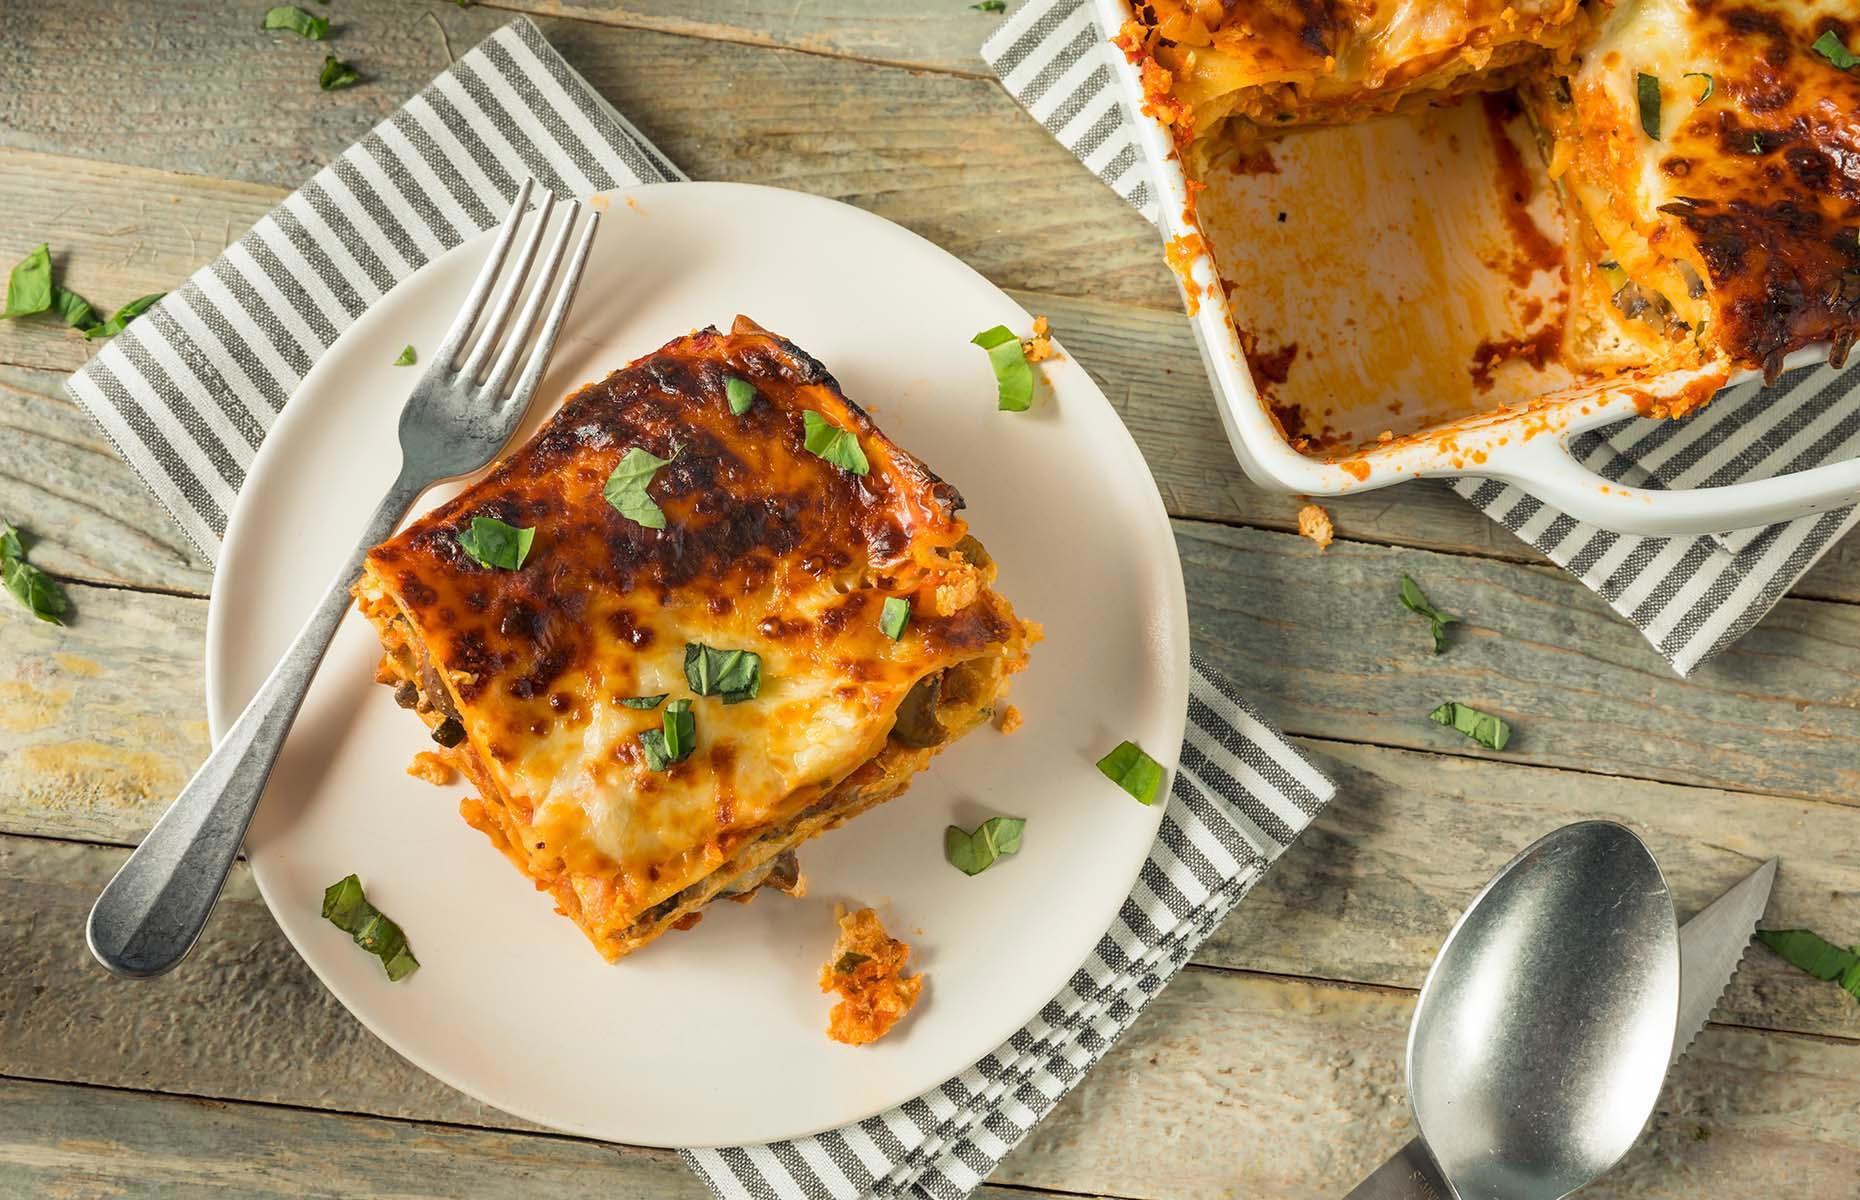 Make The Best Lasagna EVER With These Top Tips